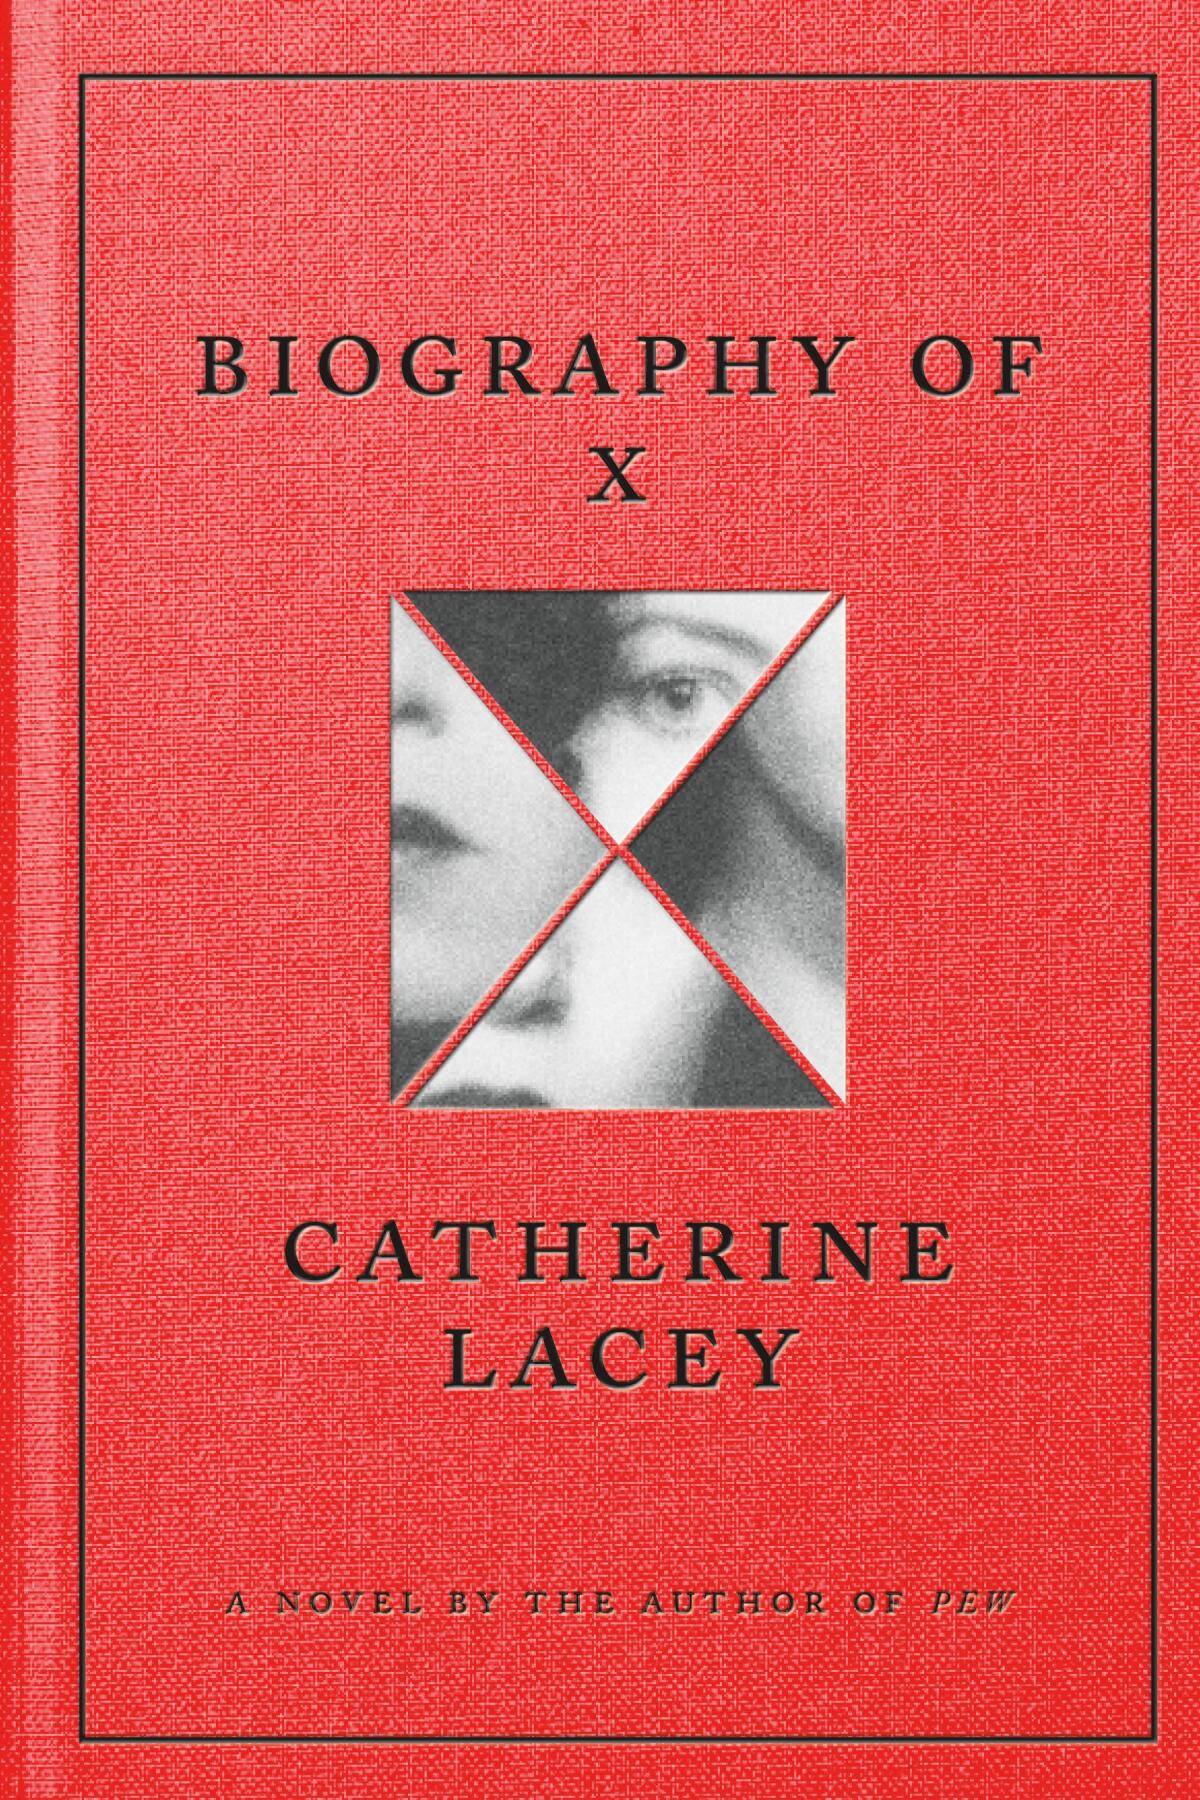 'Biography of X,' by Catherine Lacey